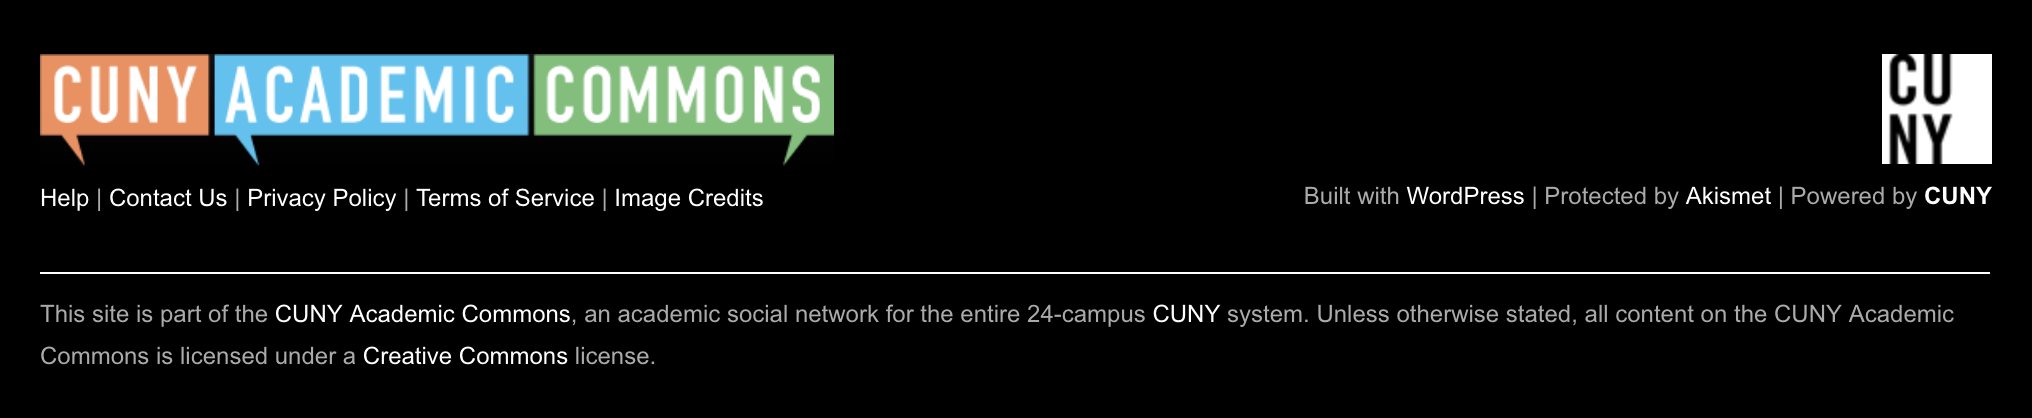 cuny-footer-option-2_size-3.png